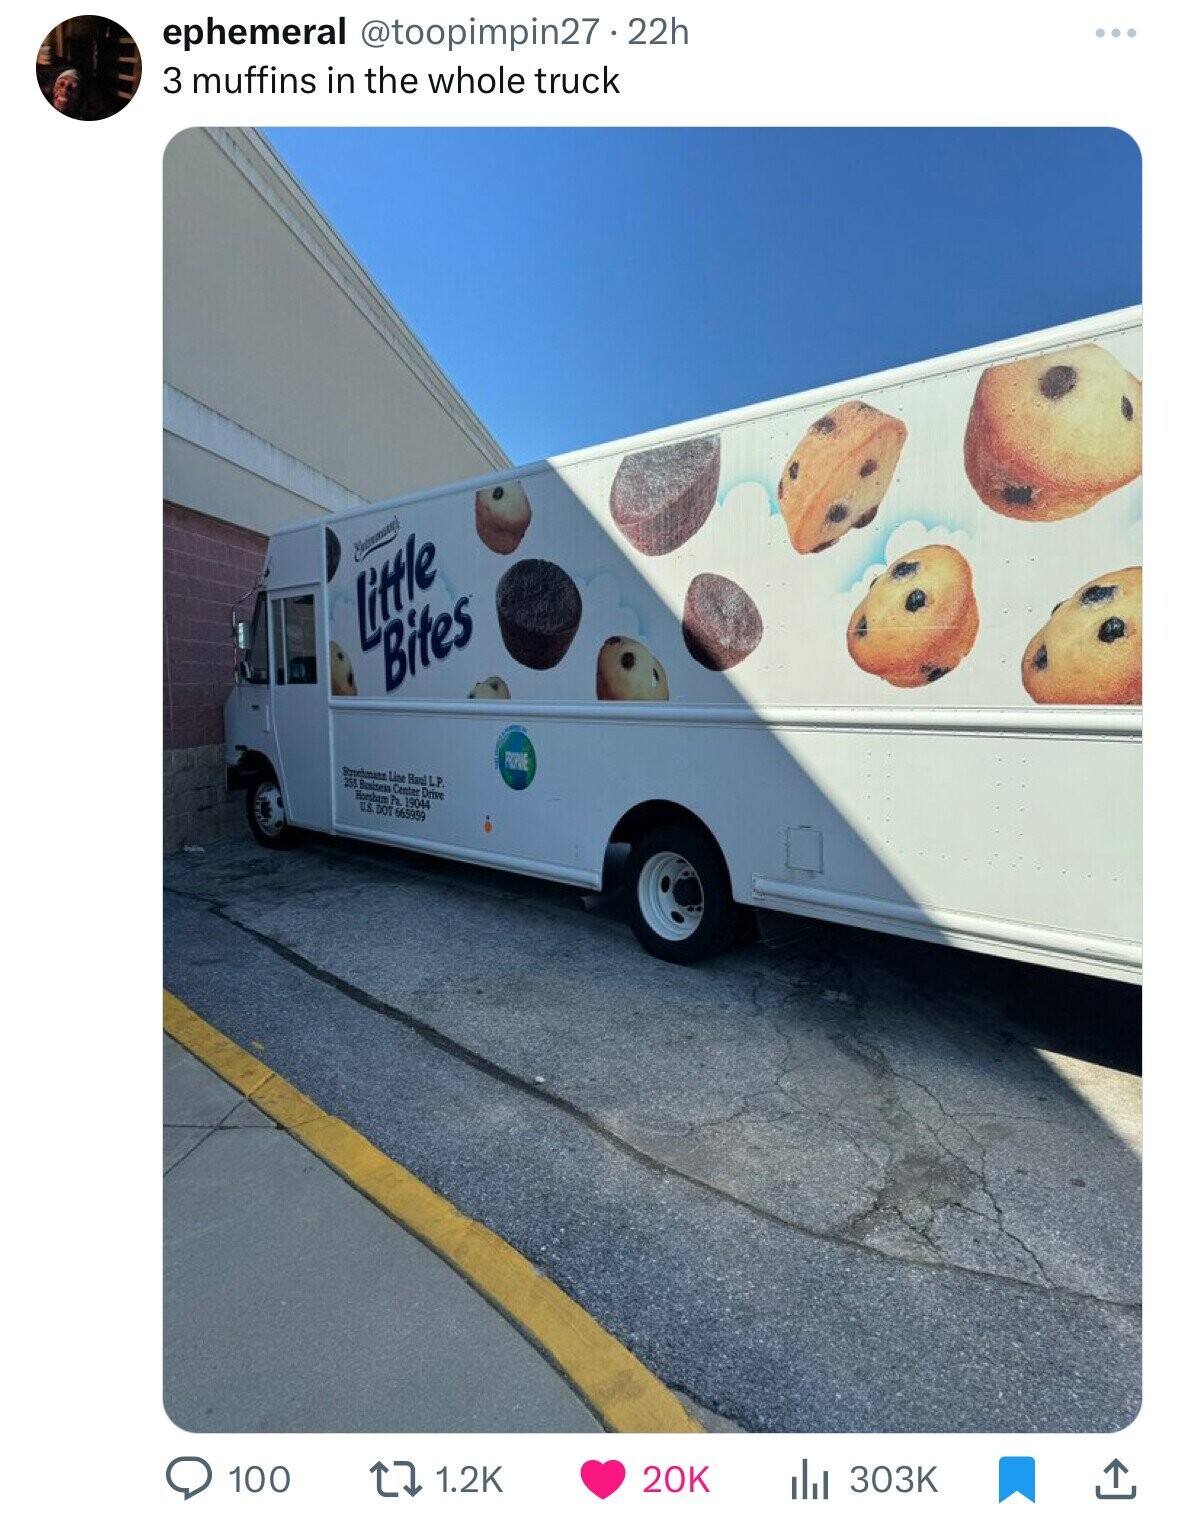 commercial vehicle - ephemeral 22h 3 muffins in the whole truck Entremse's little Bites Strehmann Line Haul L.P. 255 Business Center Drive Horsham Pa. 19044 Us. Dot 665999 Prope 100 t 20K 1